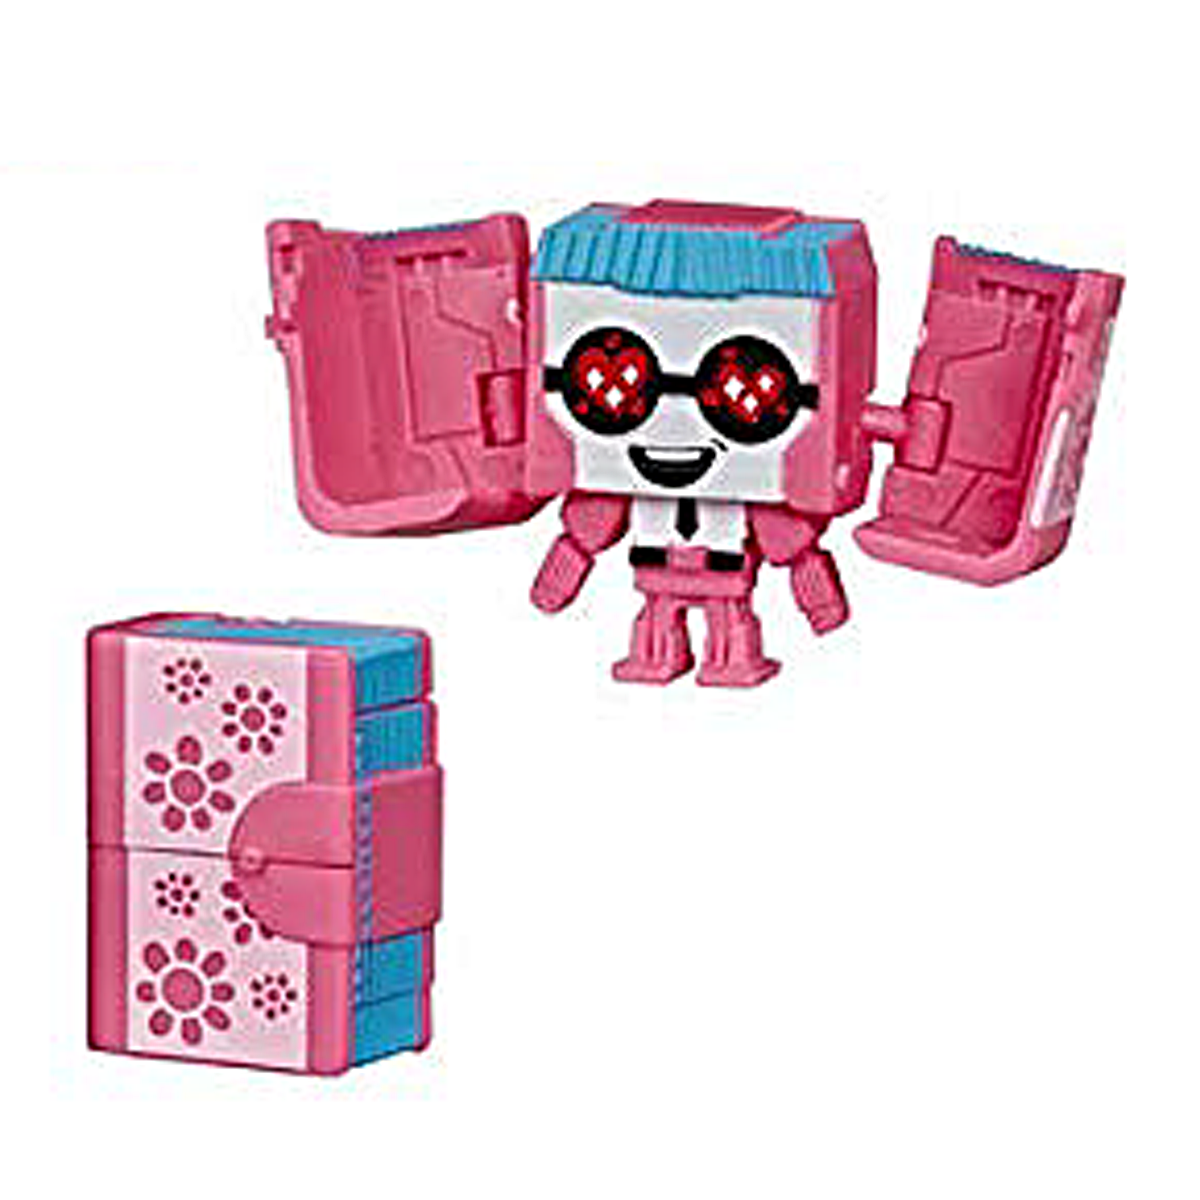 BLABBERBOOK Transformers BotBots Series 3 Swag Stylers diary book 2019 Hasbro